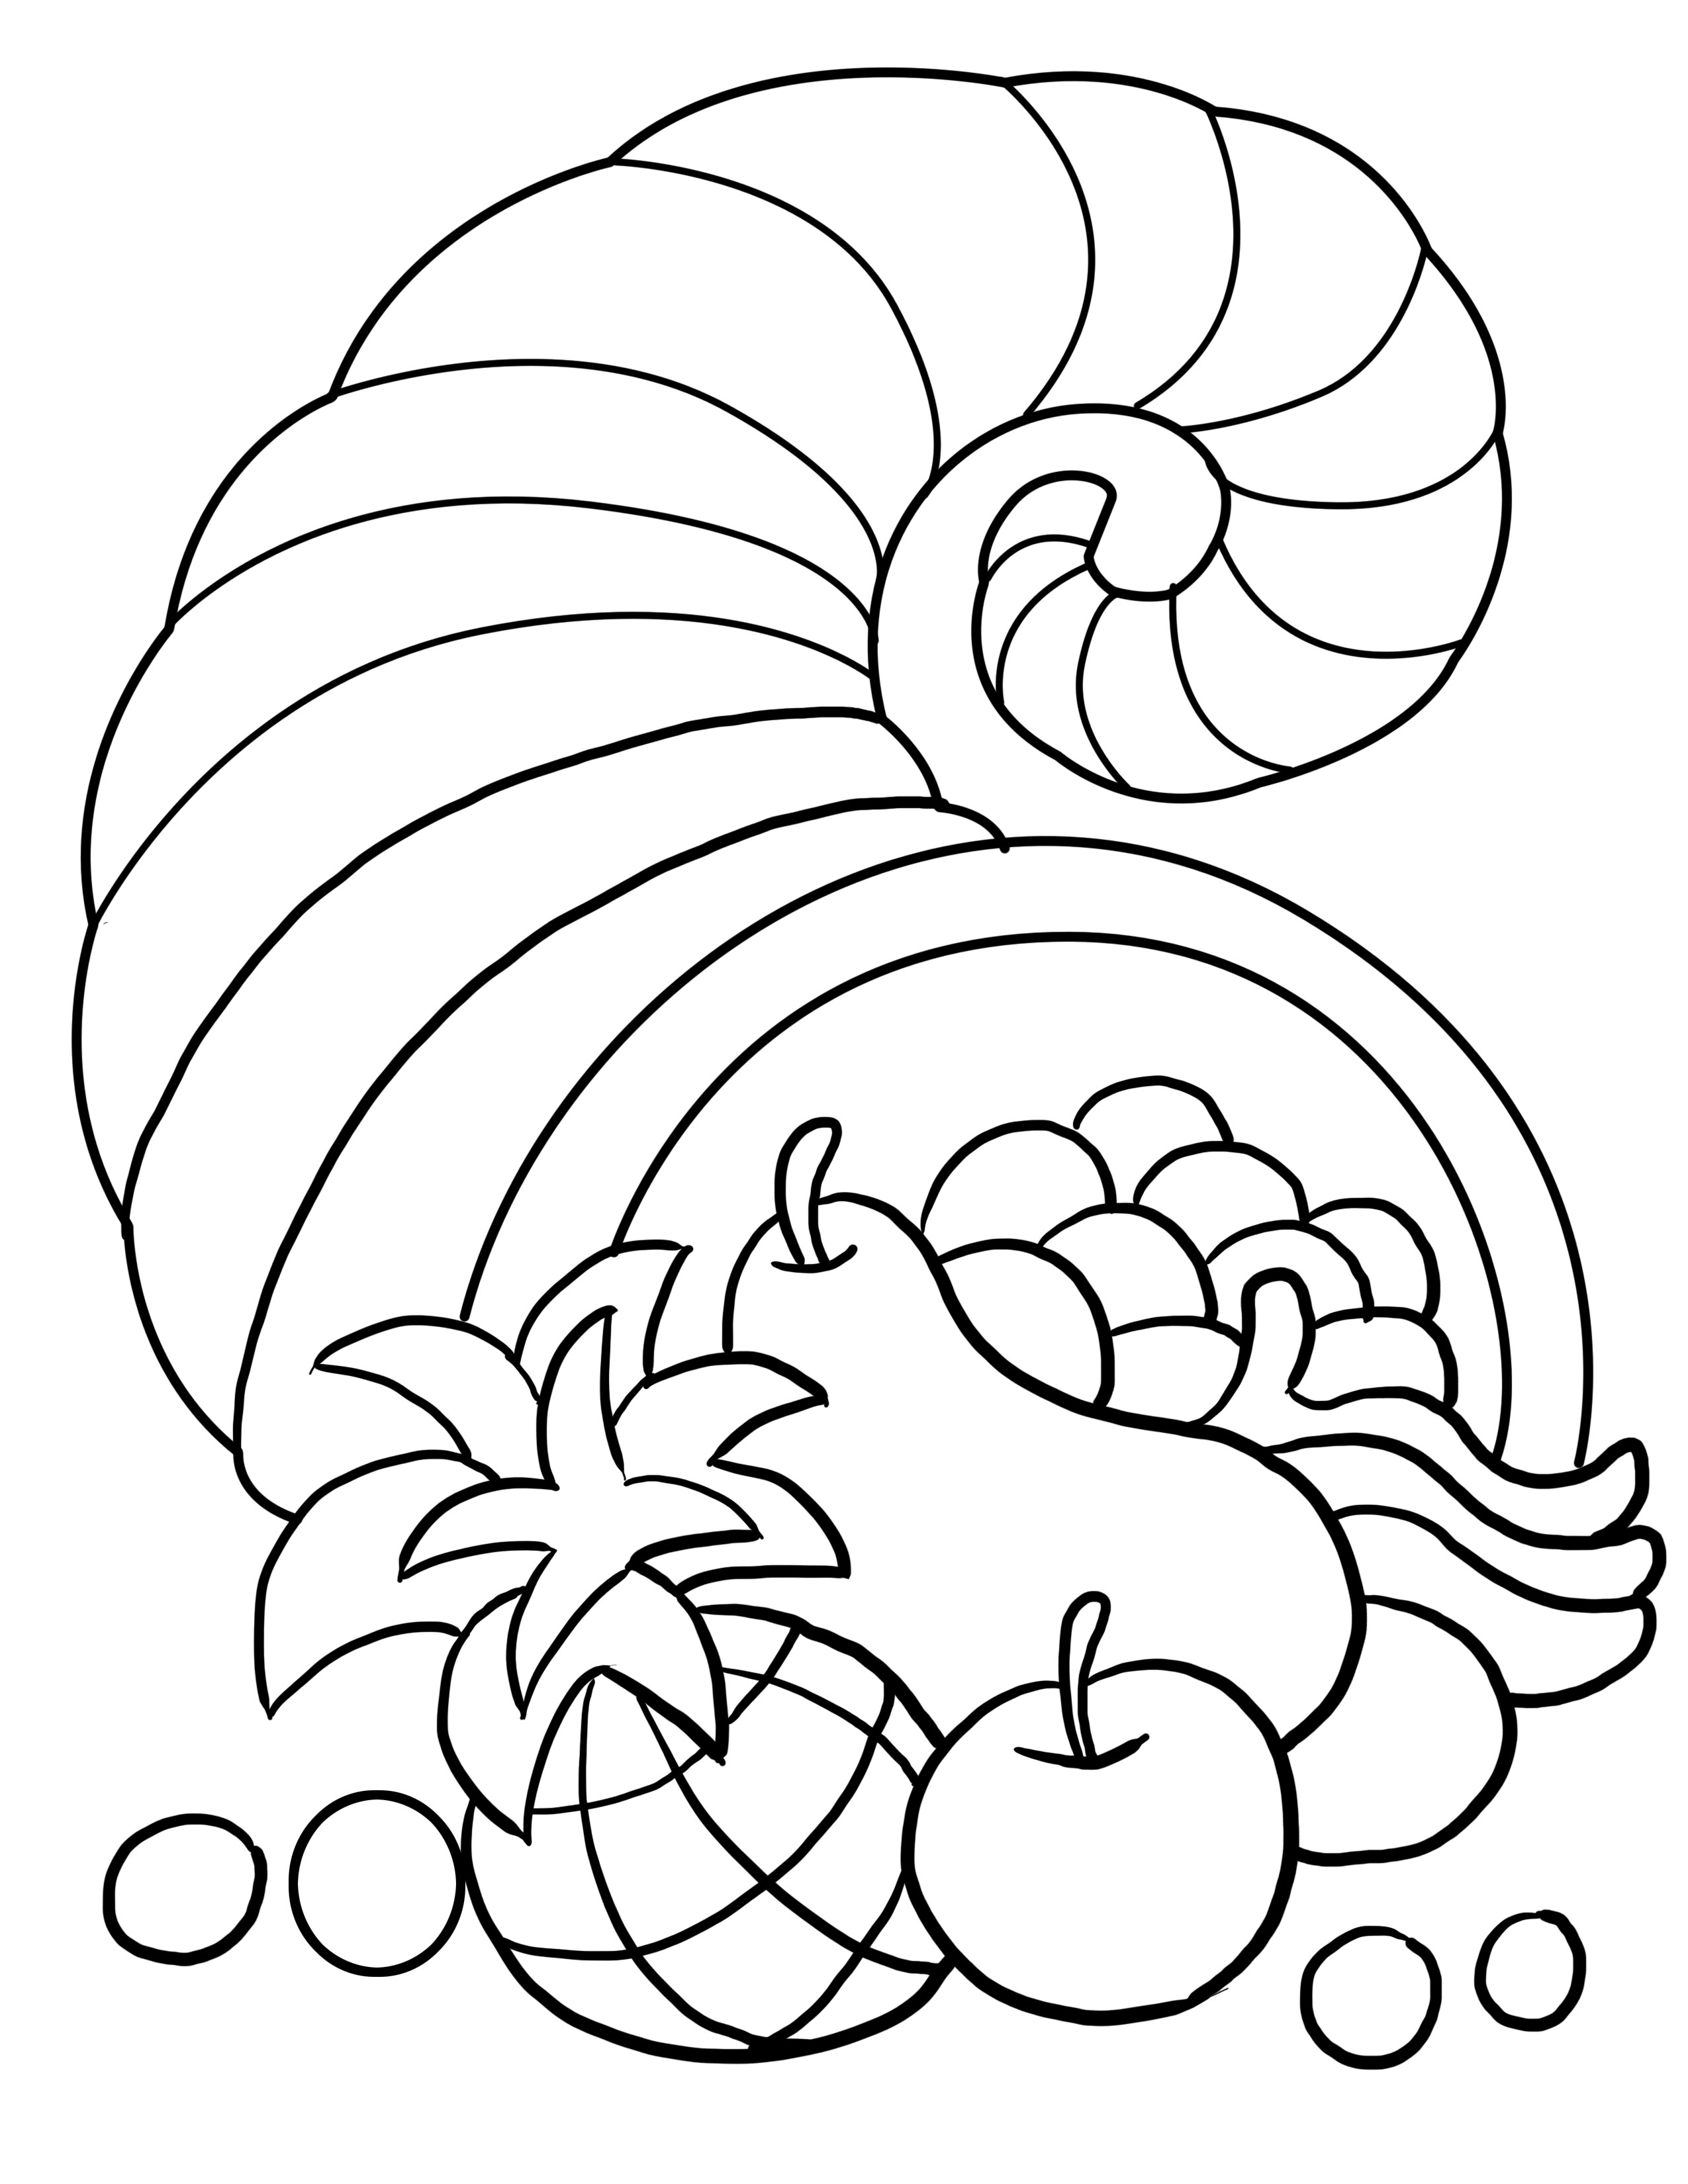 Thanksgiving Turkey Coloring Pages Printables
 Thanksgiving Coloring Pages